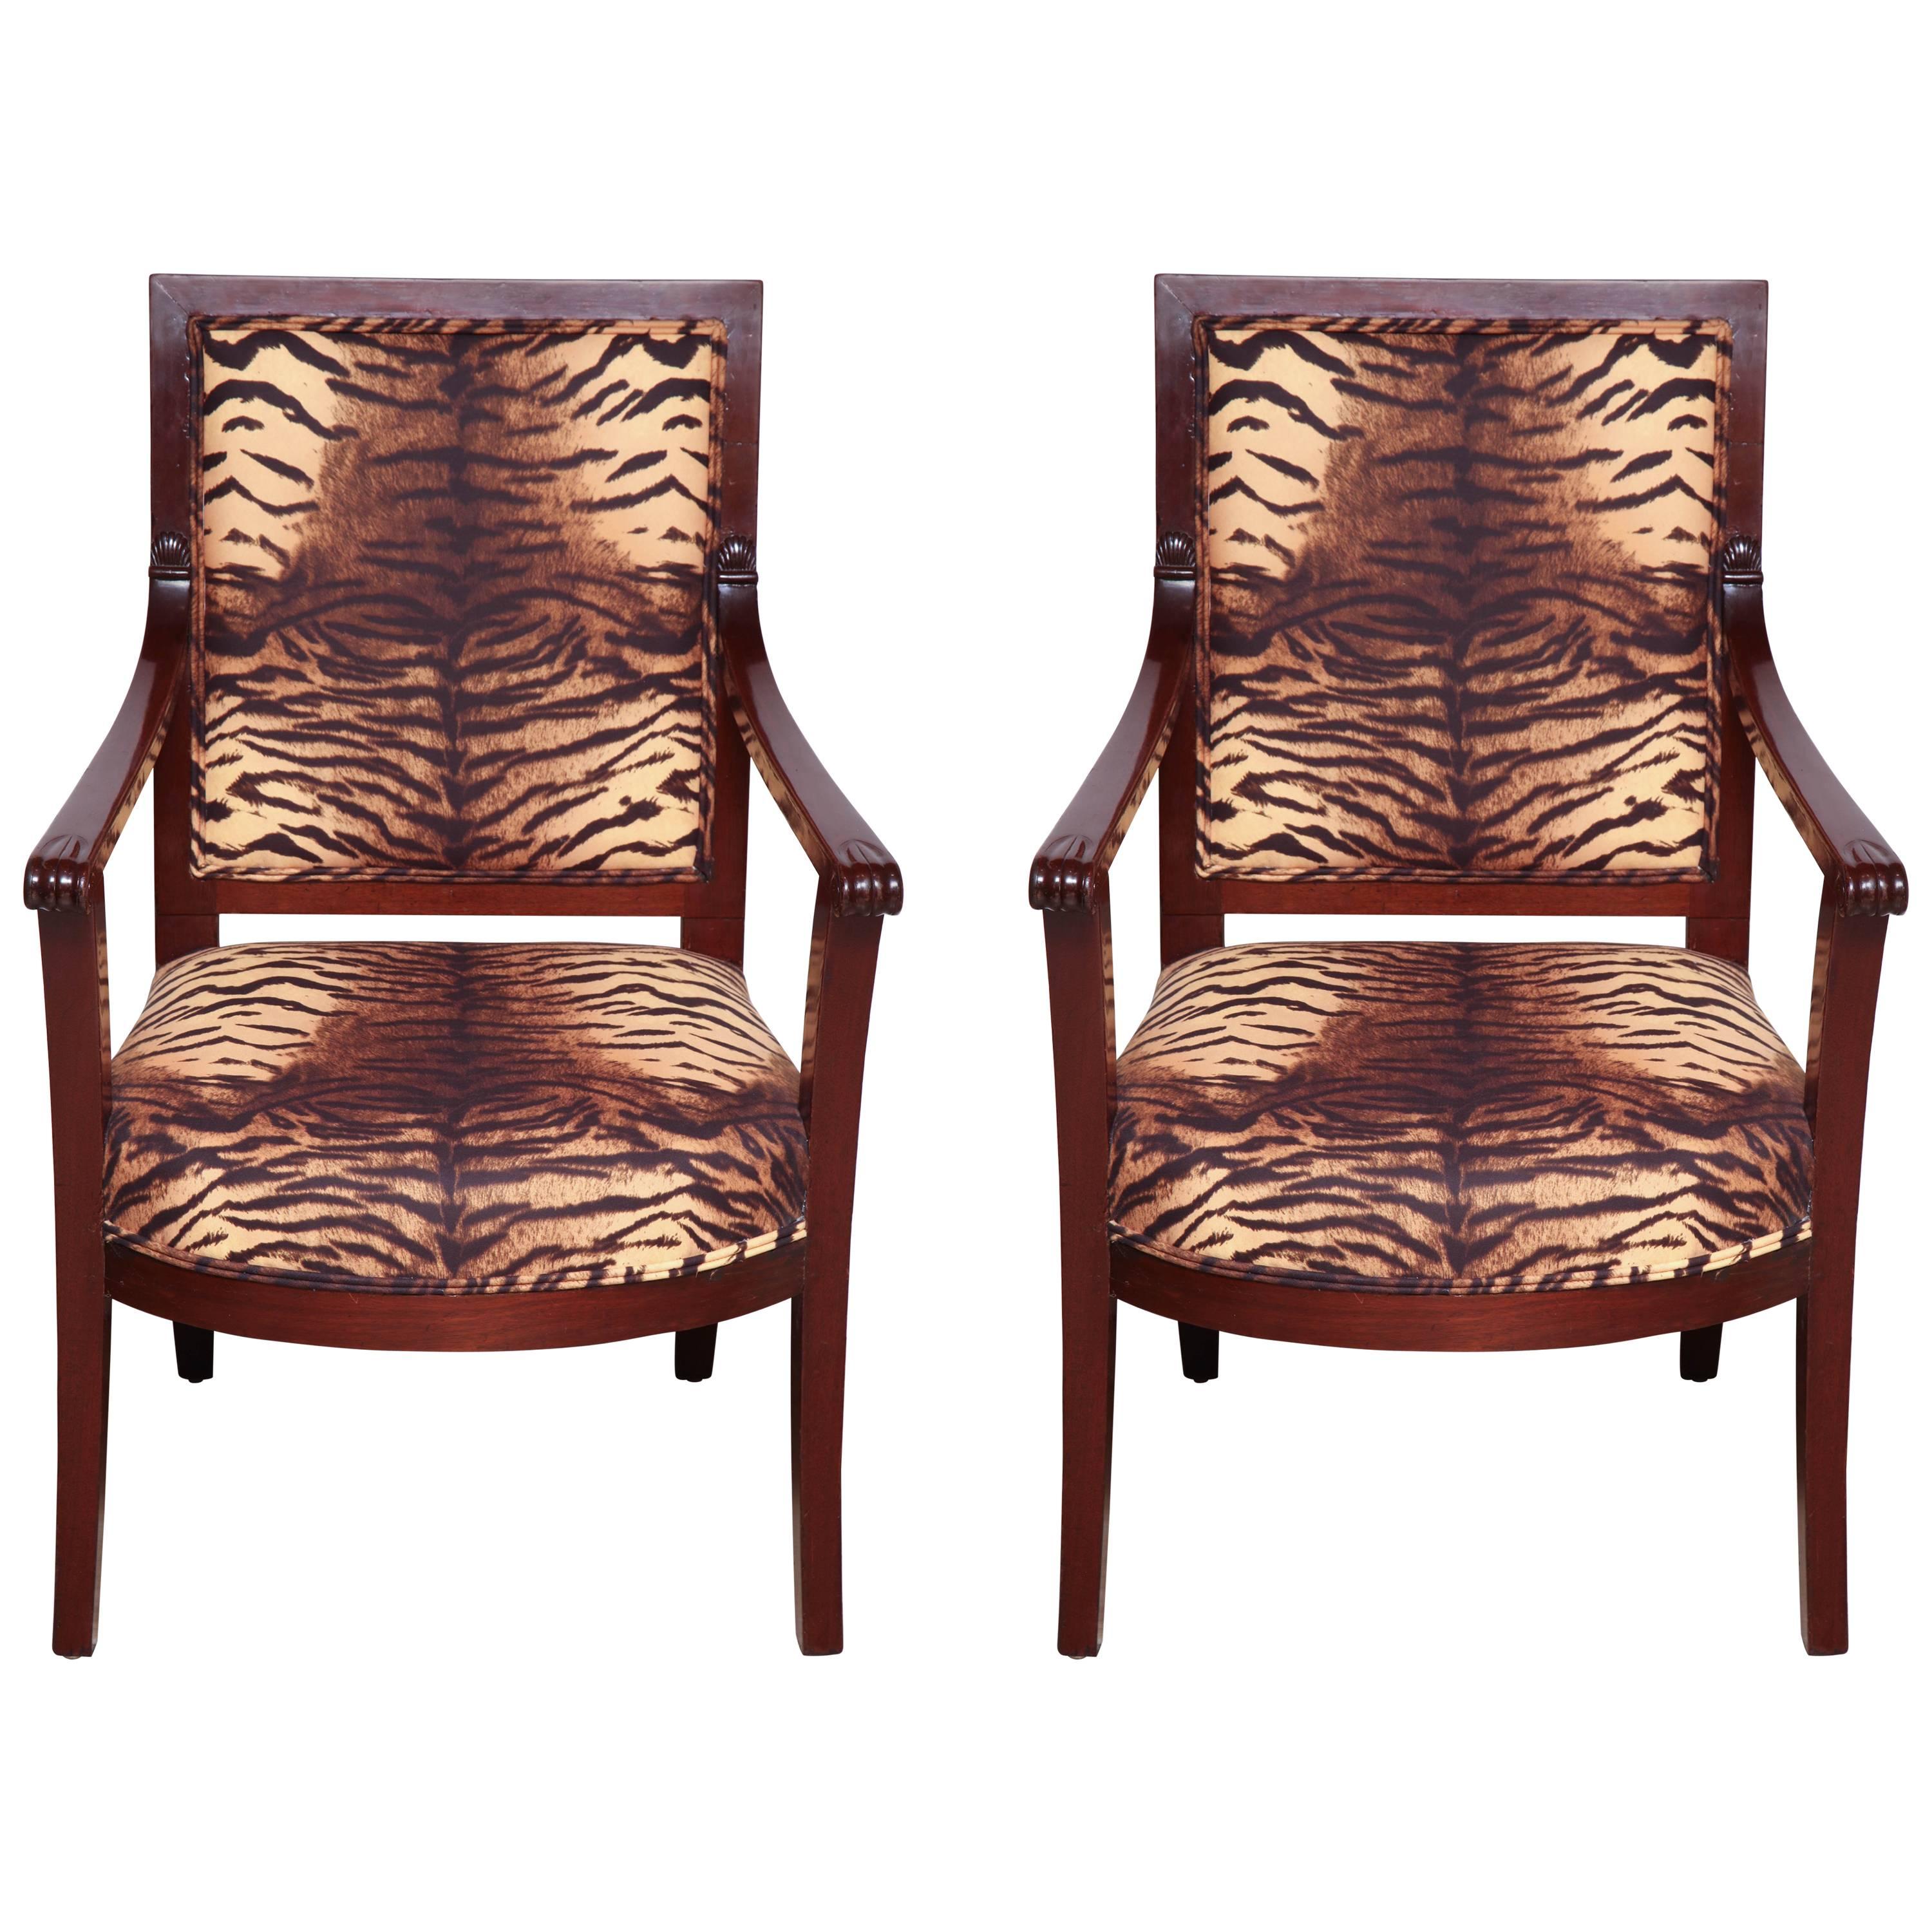 Pair of French Directoire Mahogany Fauteuil's